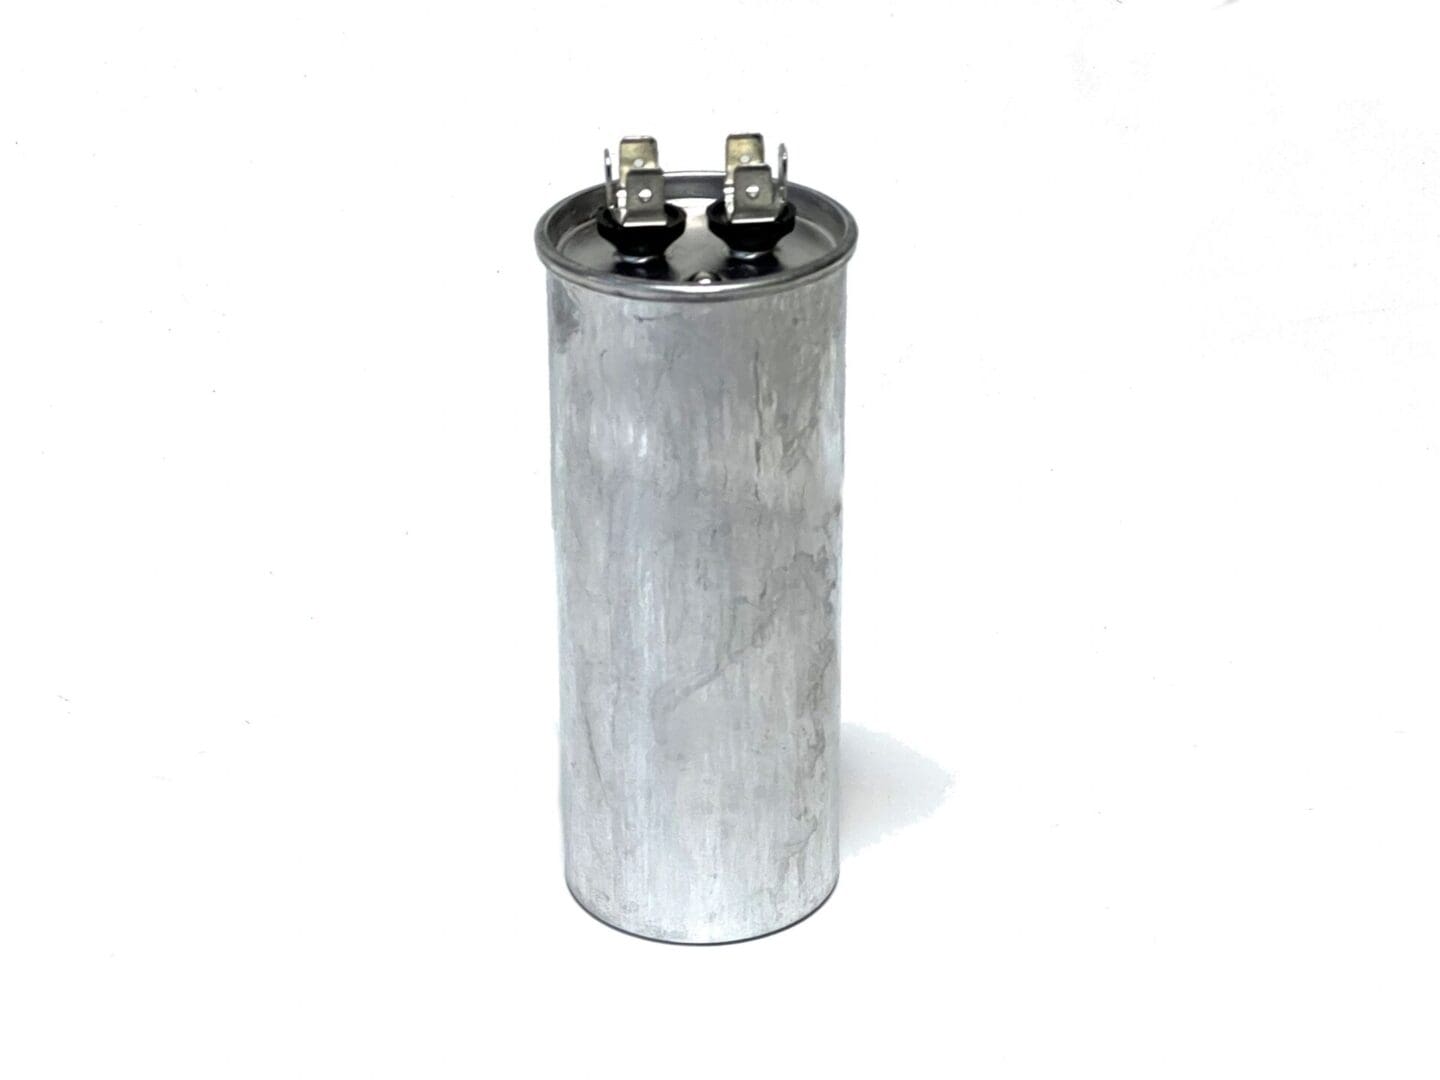 A close up of an electric motor capacitor